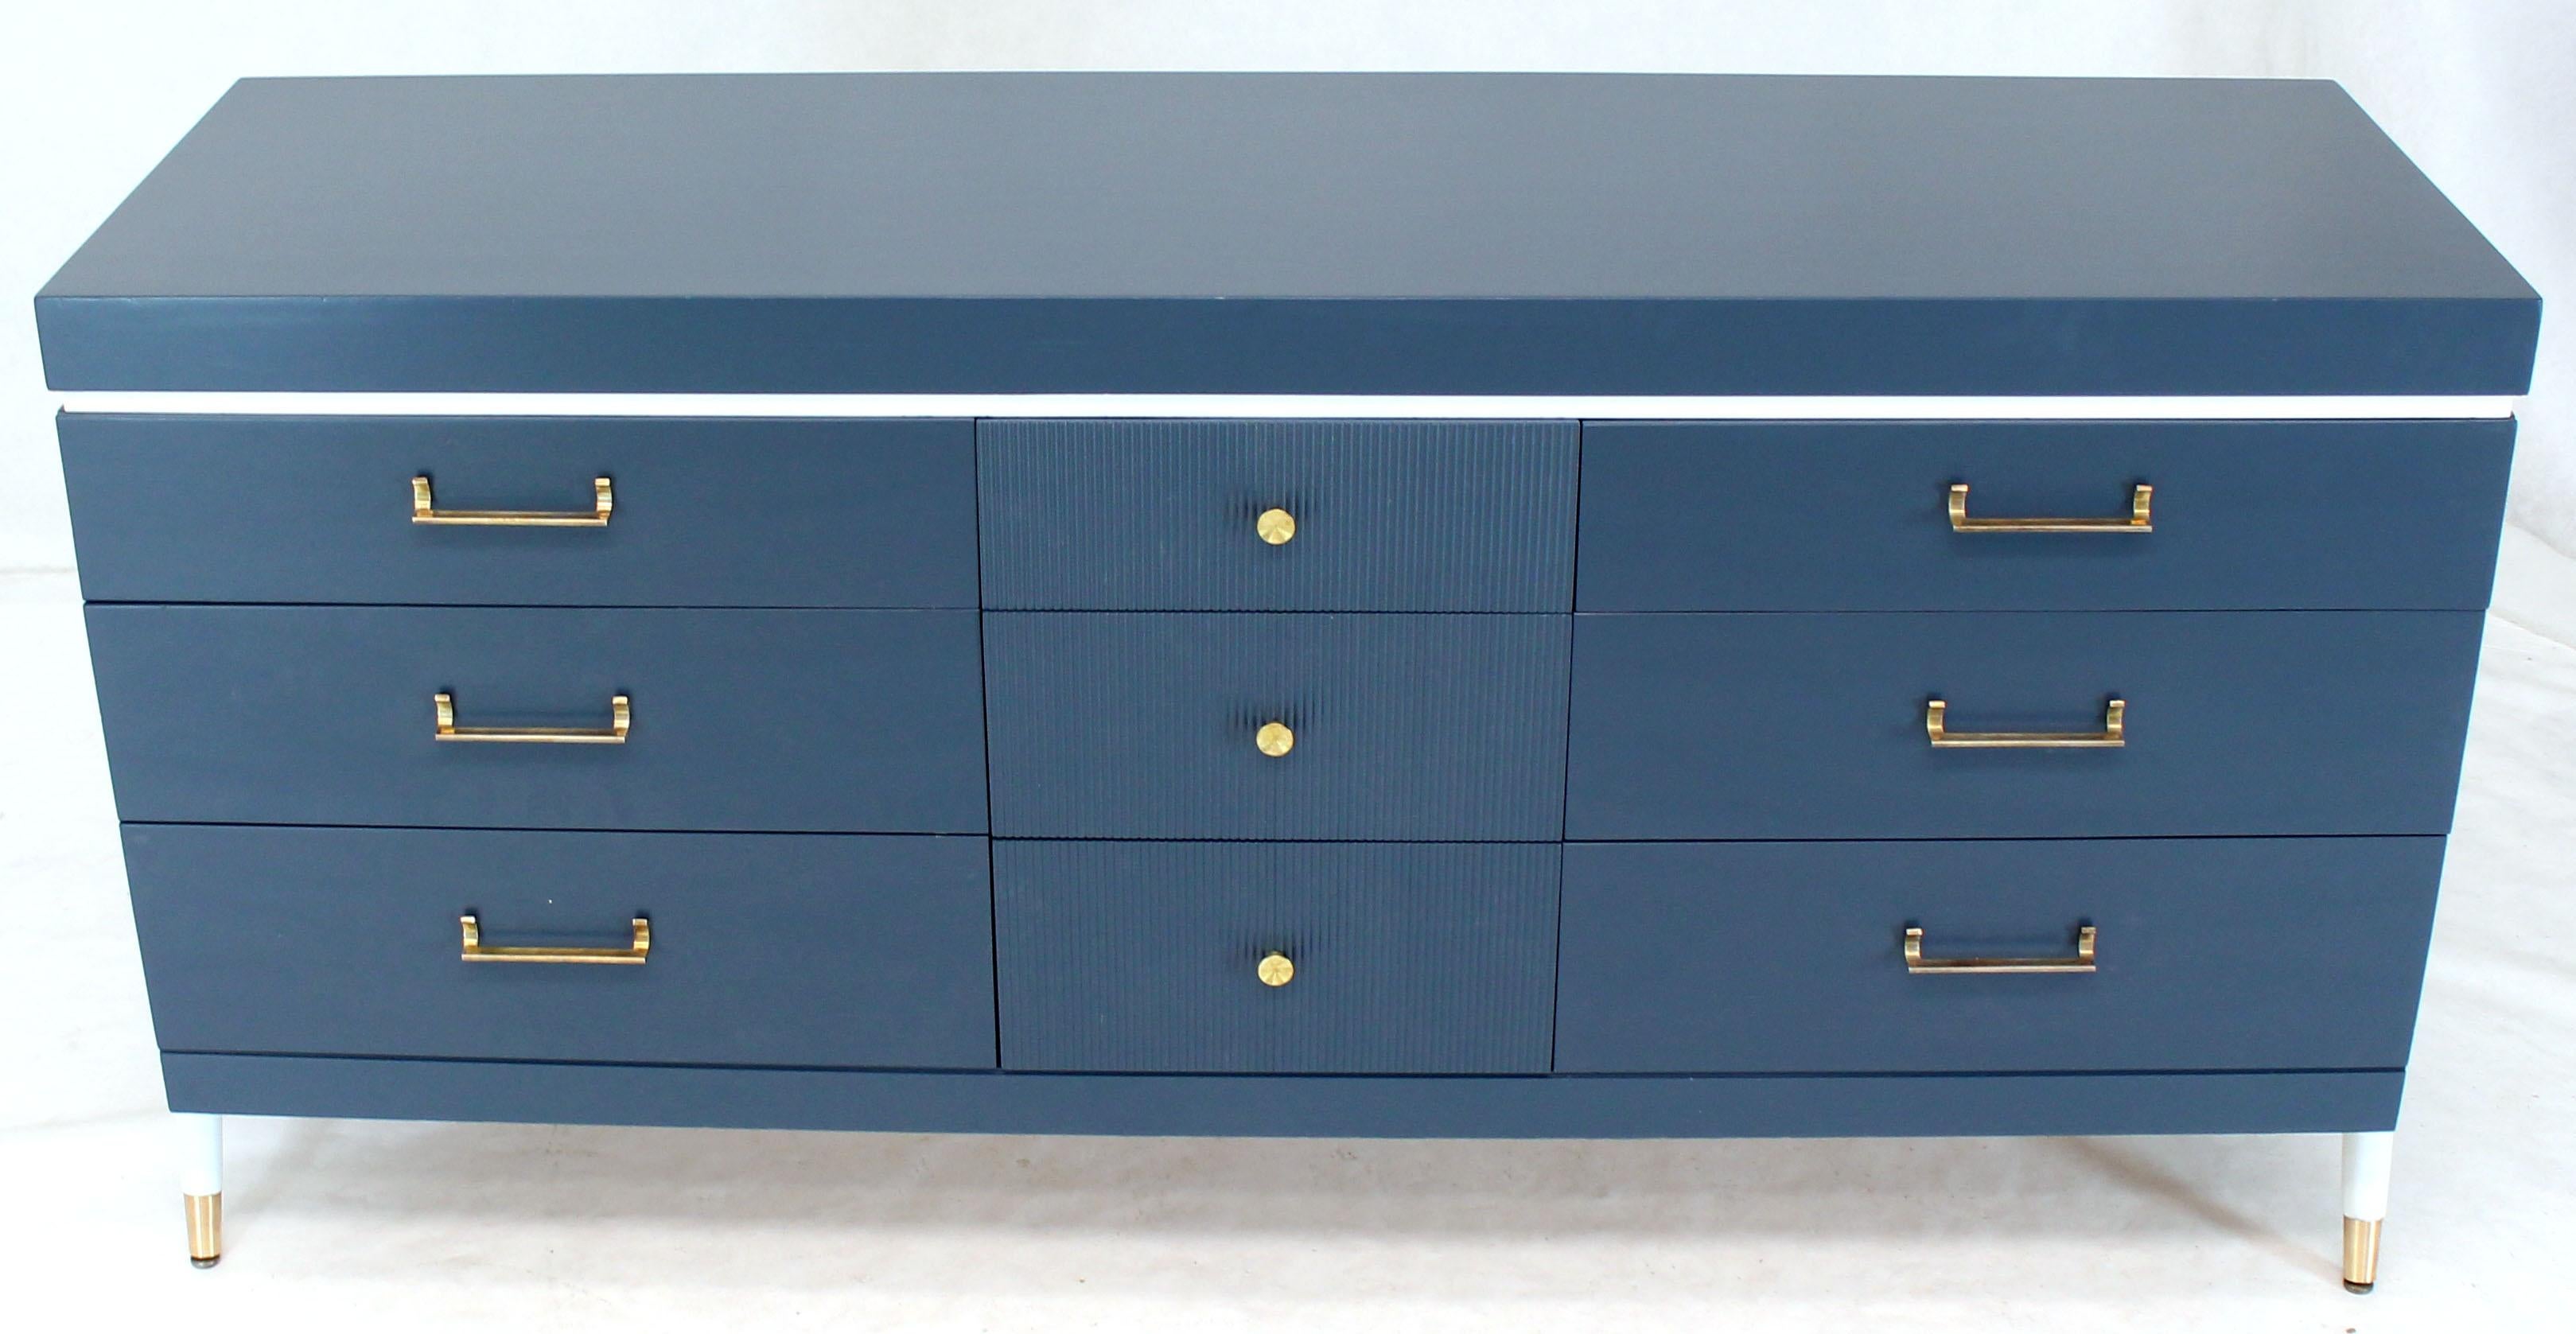 Painted White and Blue Exposed Sculptural Compass Shape Legs Nine Drawers Dresser